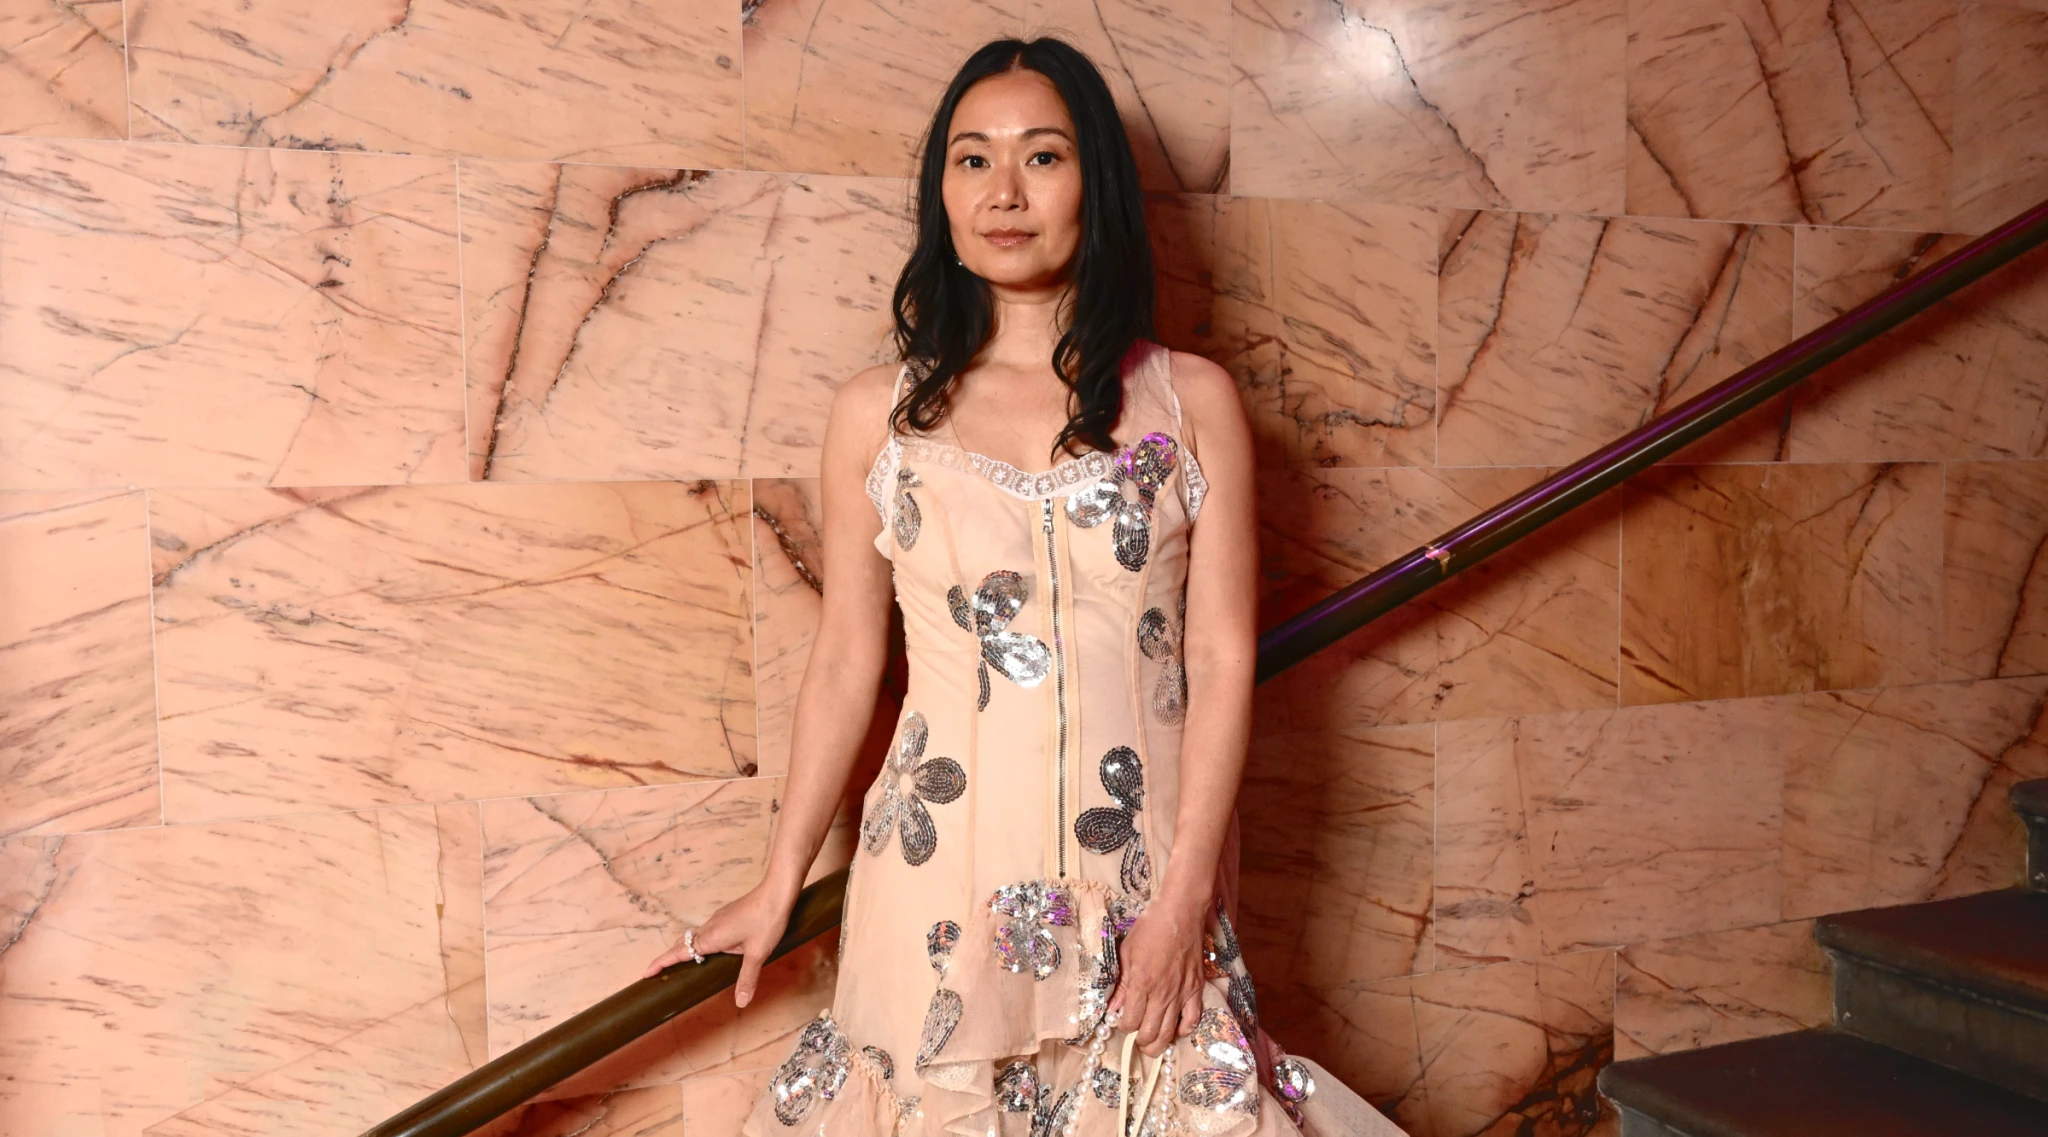 'I've Let Go of the Idea of a Perfect Take': How Hong Chau Reinvented Herself for 'The Whale' (Exclusive)